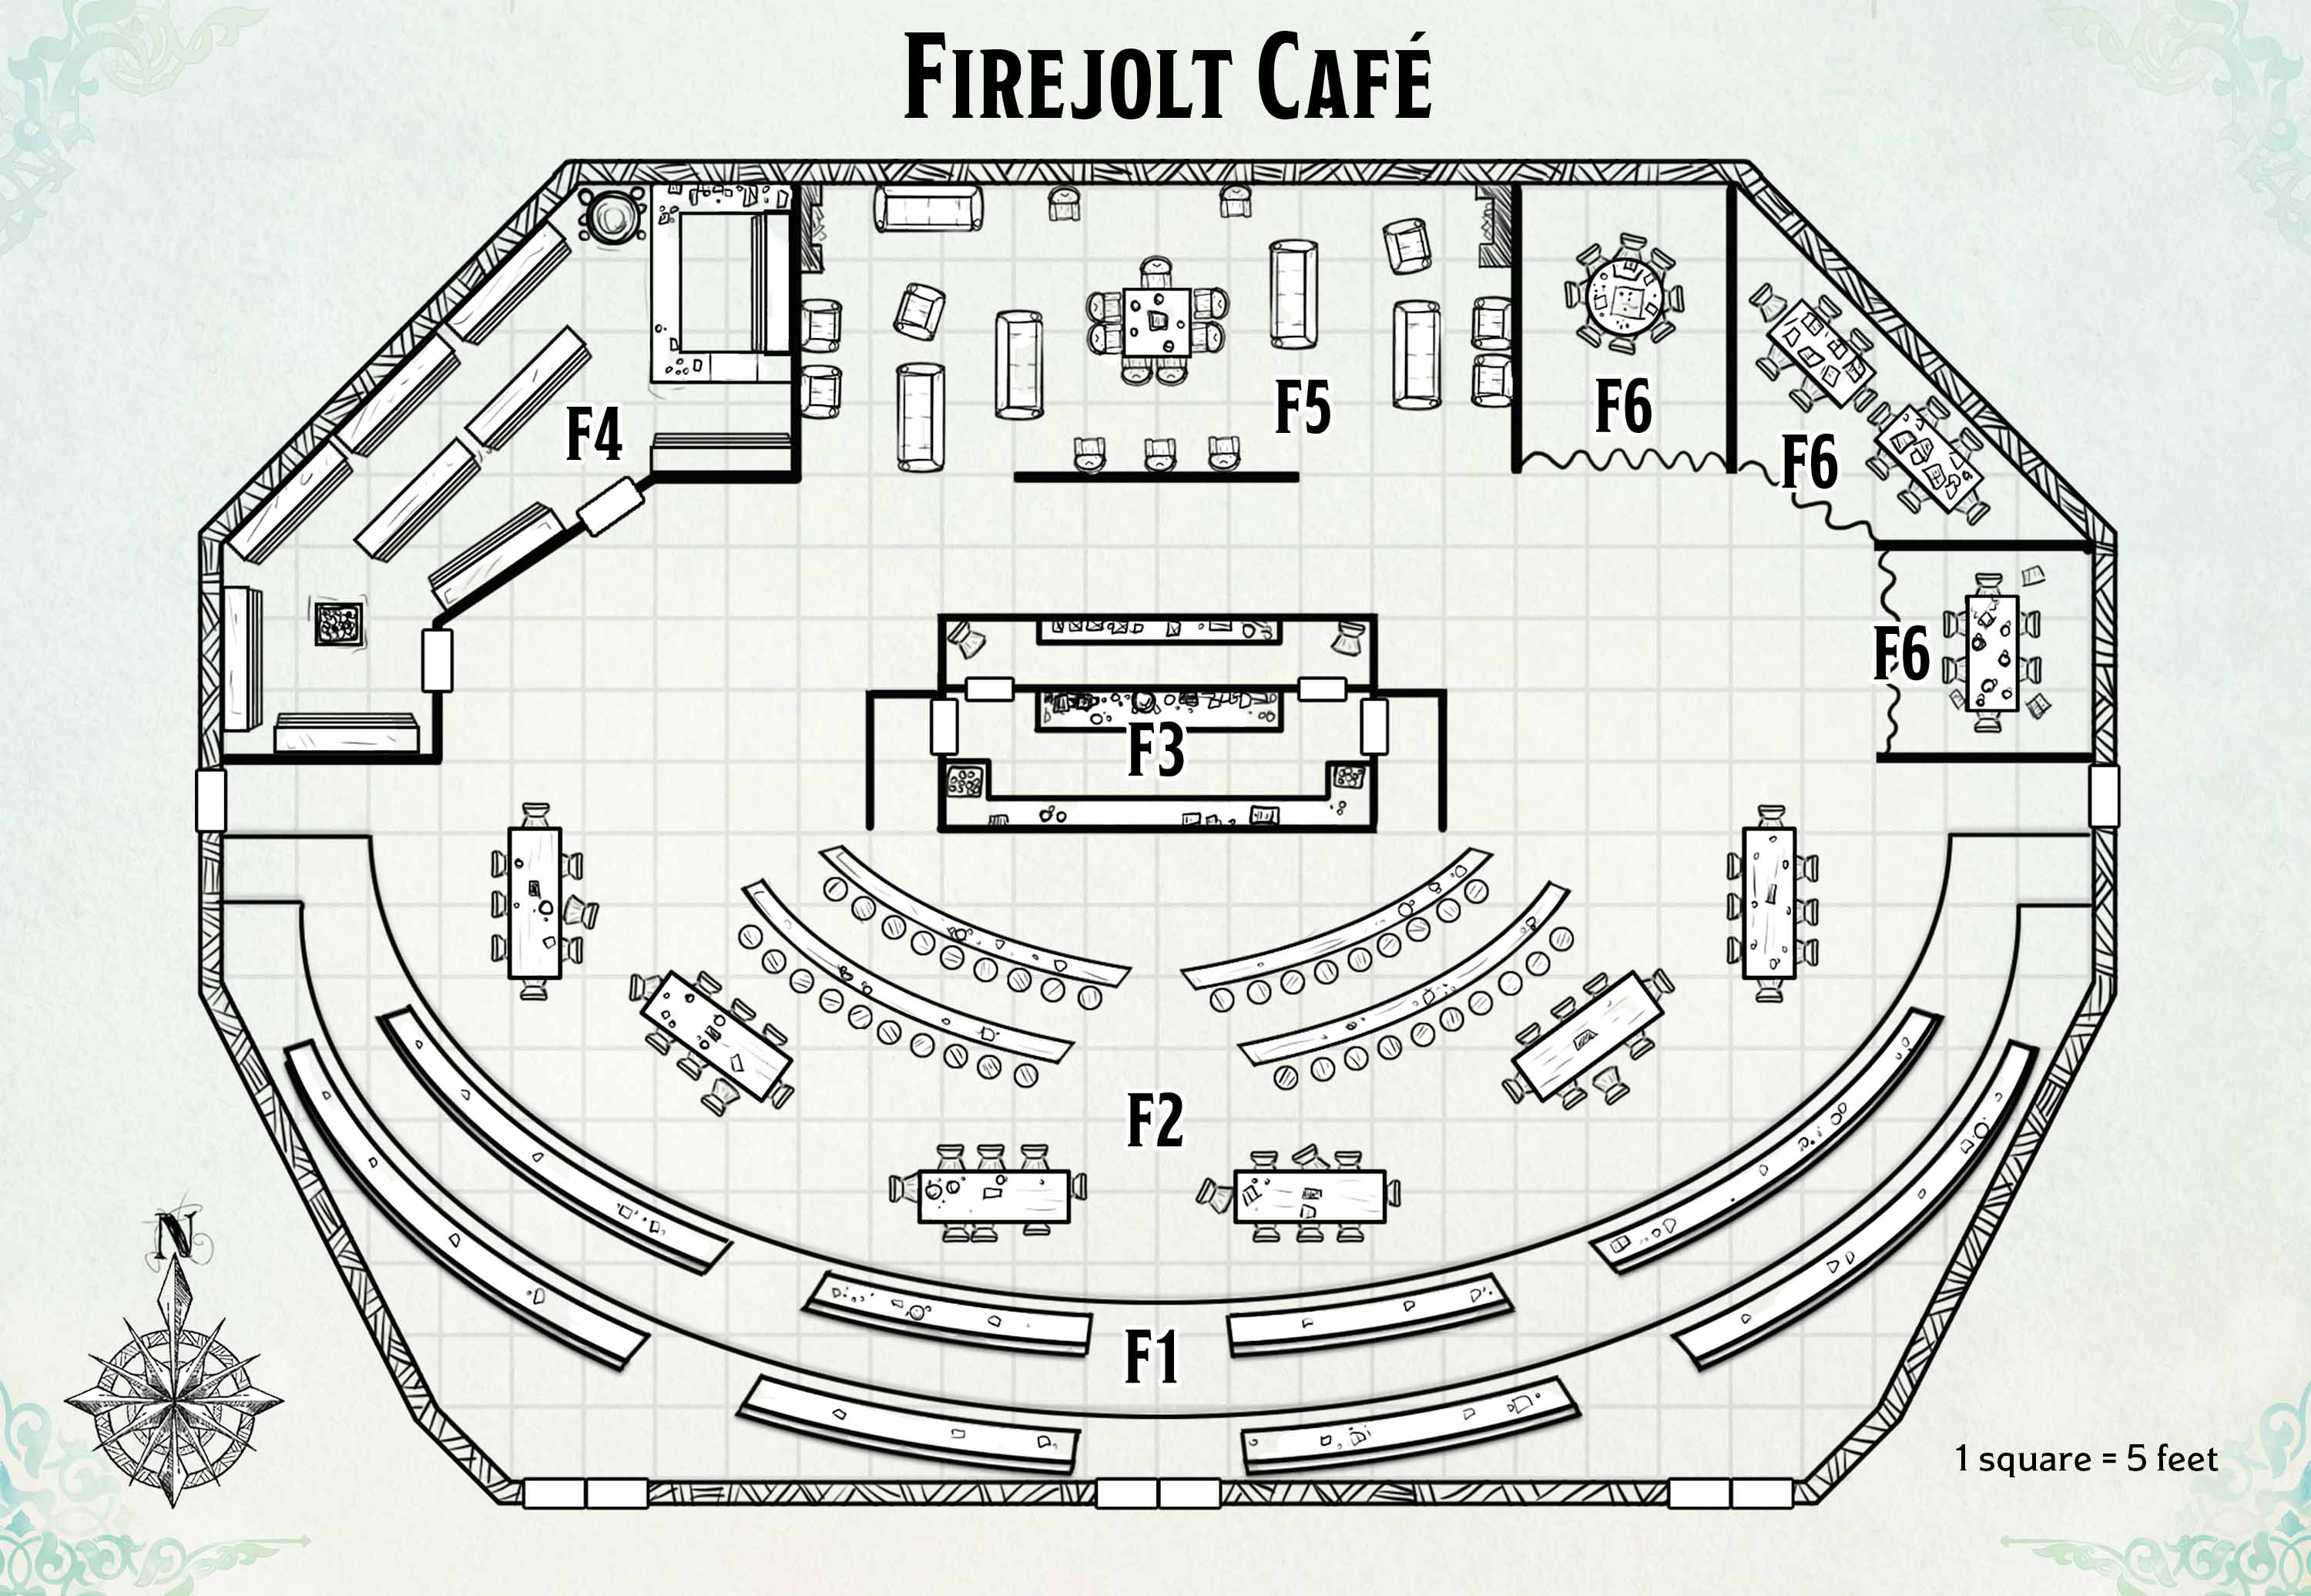 Firejolt Cafe map from Strixhaven: A Curriculum of Chaos